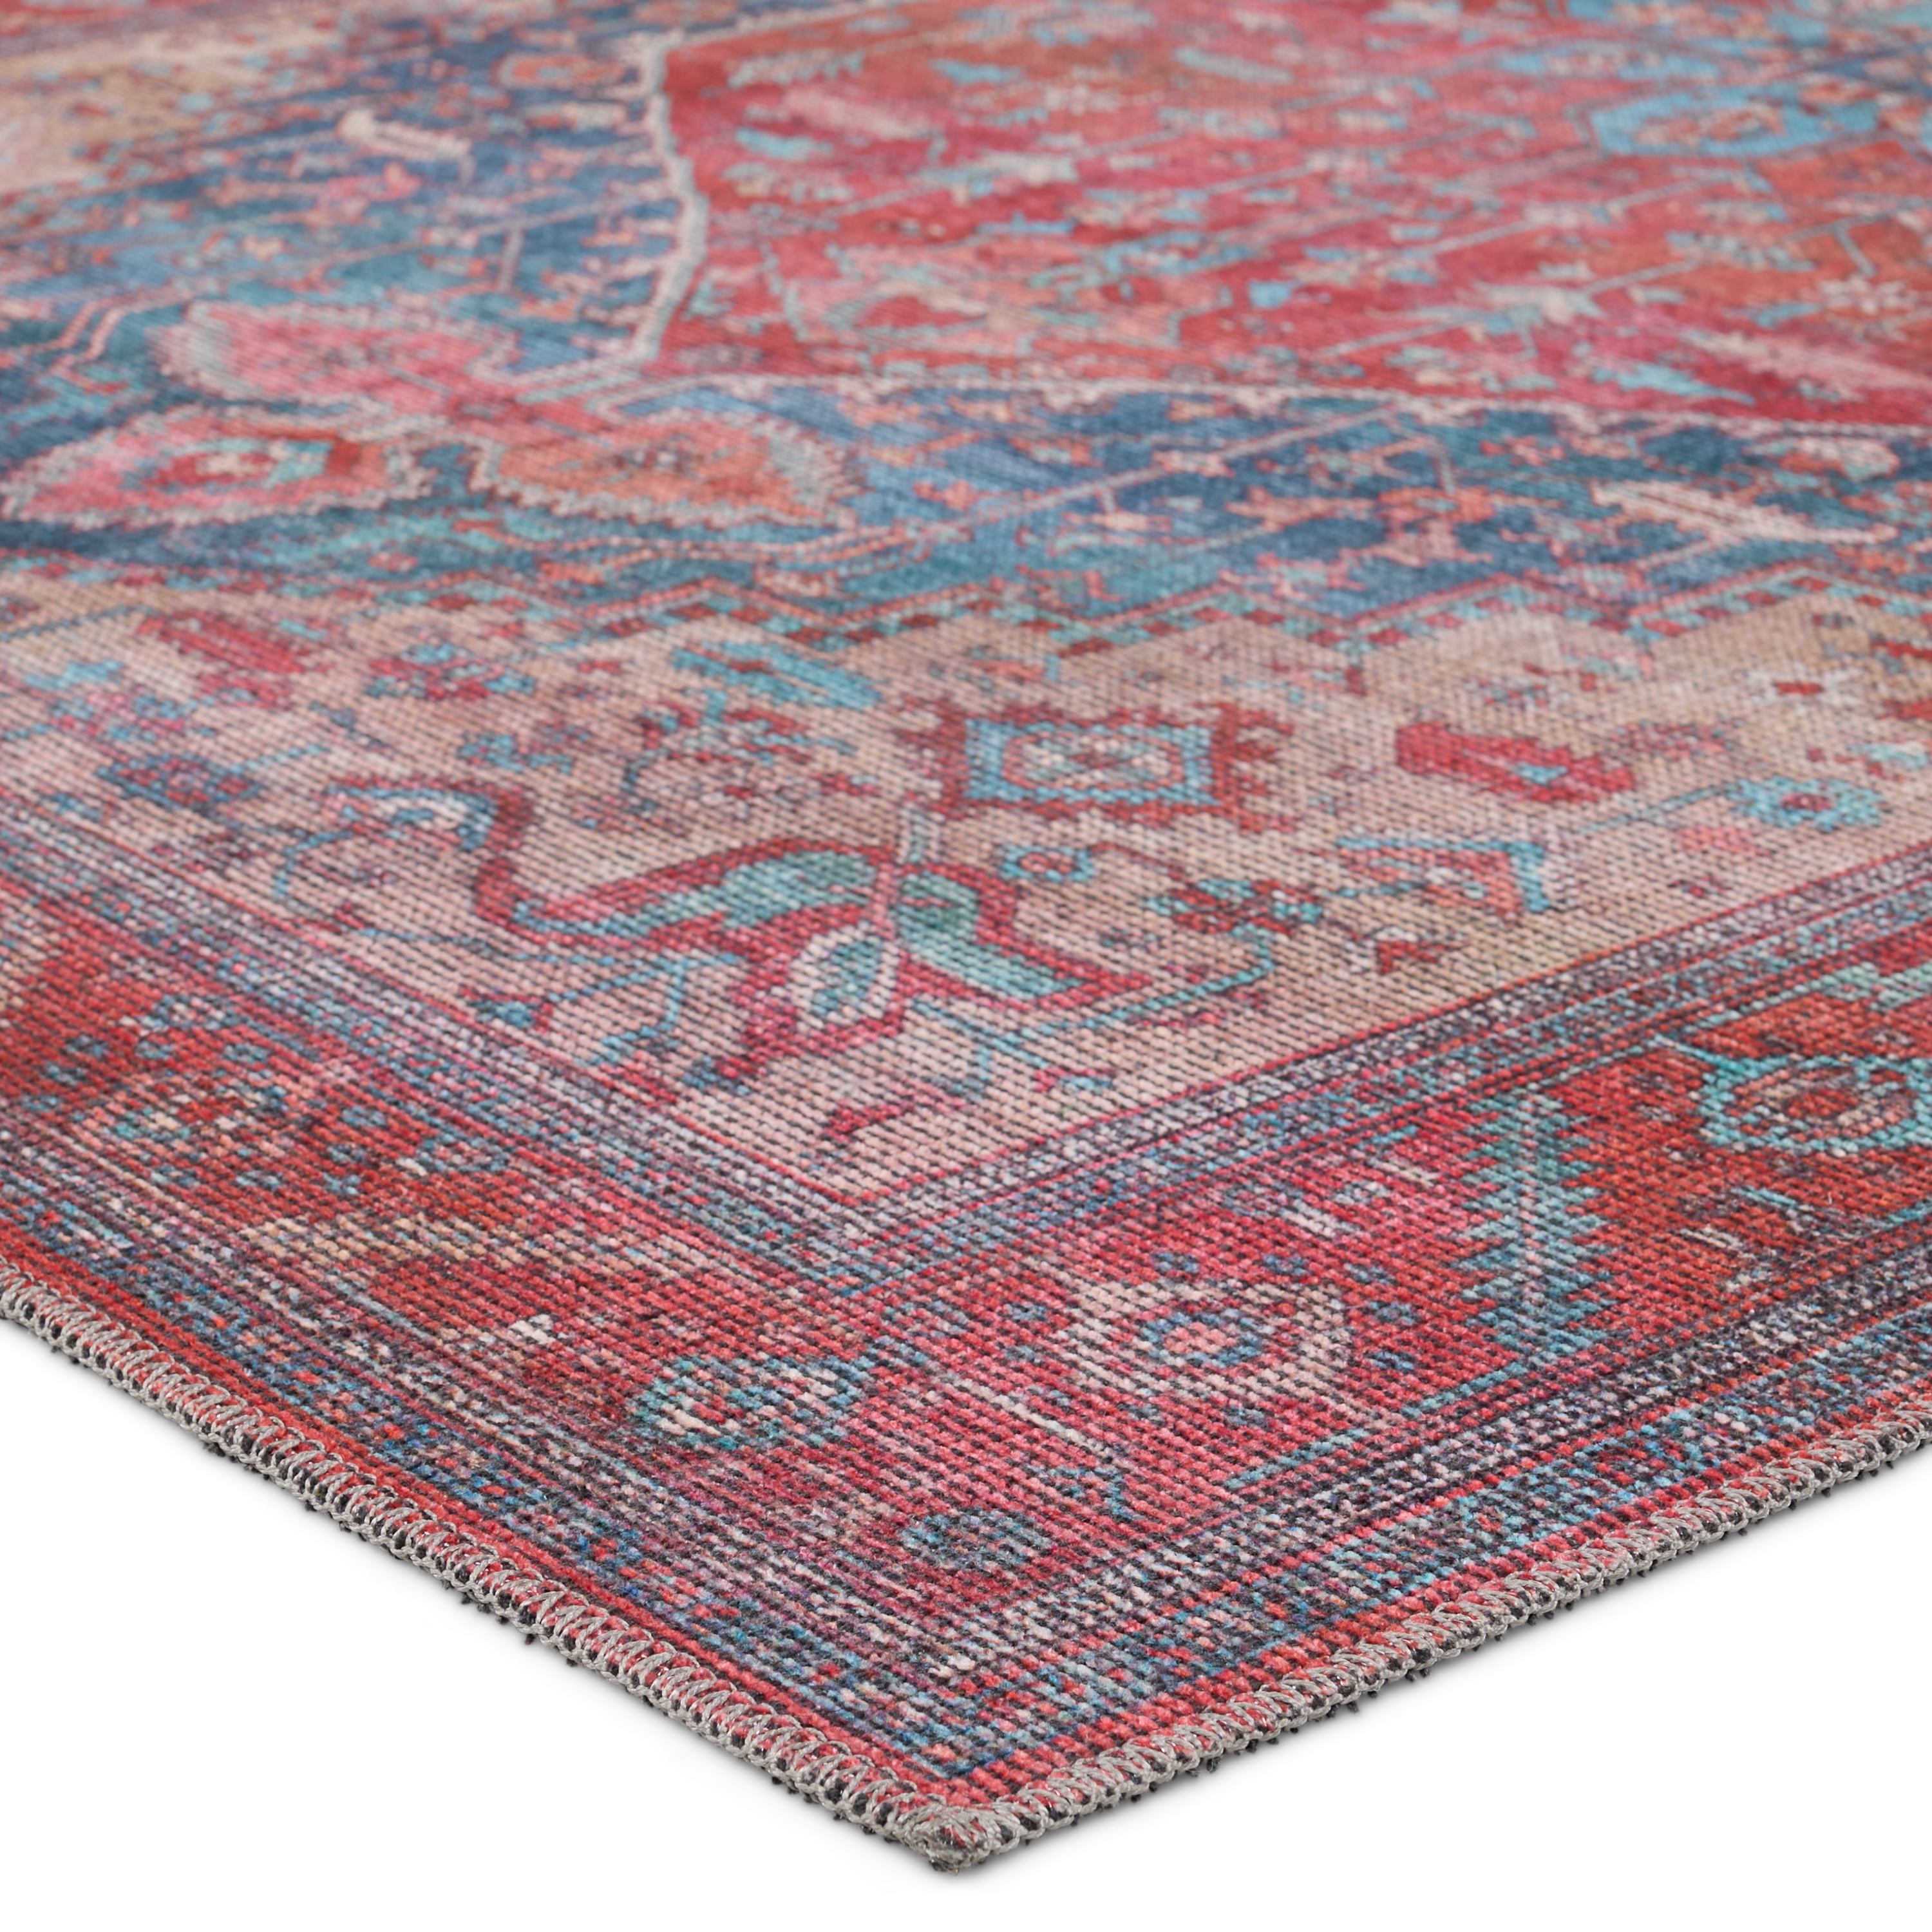 Vibe by Fairbanks Medallion Red/ Blue Area Rug (9'2"X12') - Image 1